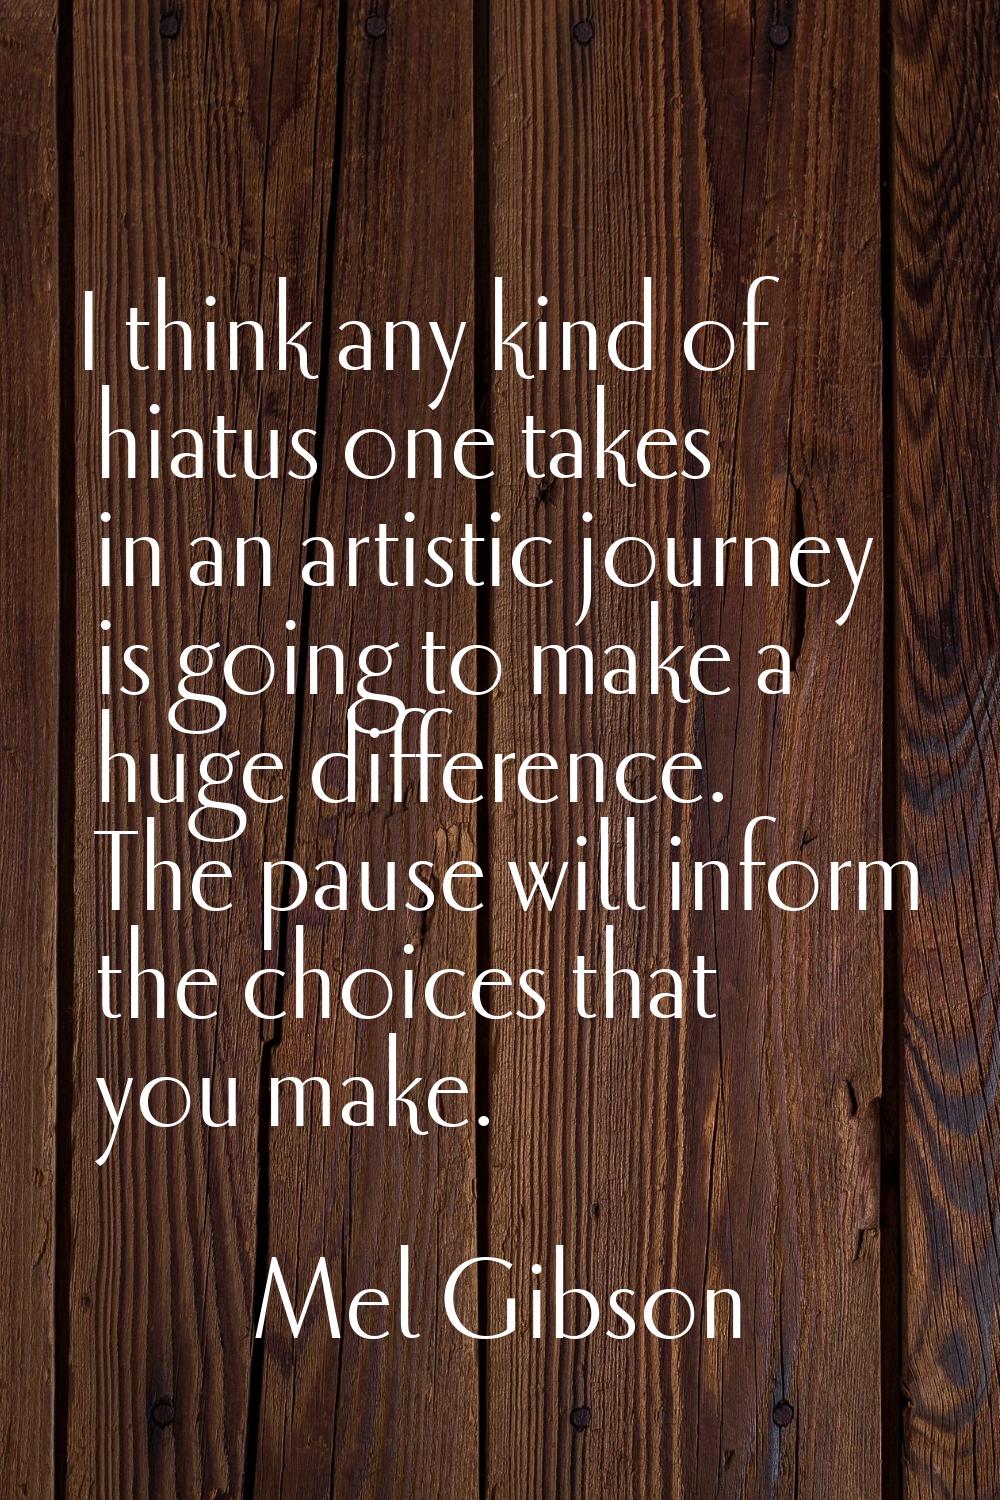 I think any kind of hiatus one takes in an artistic journey is going to make a huge difference. The